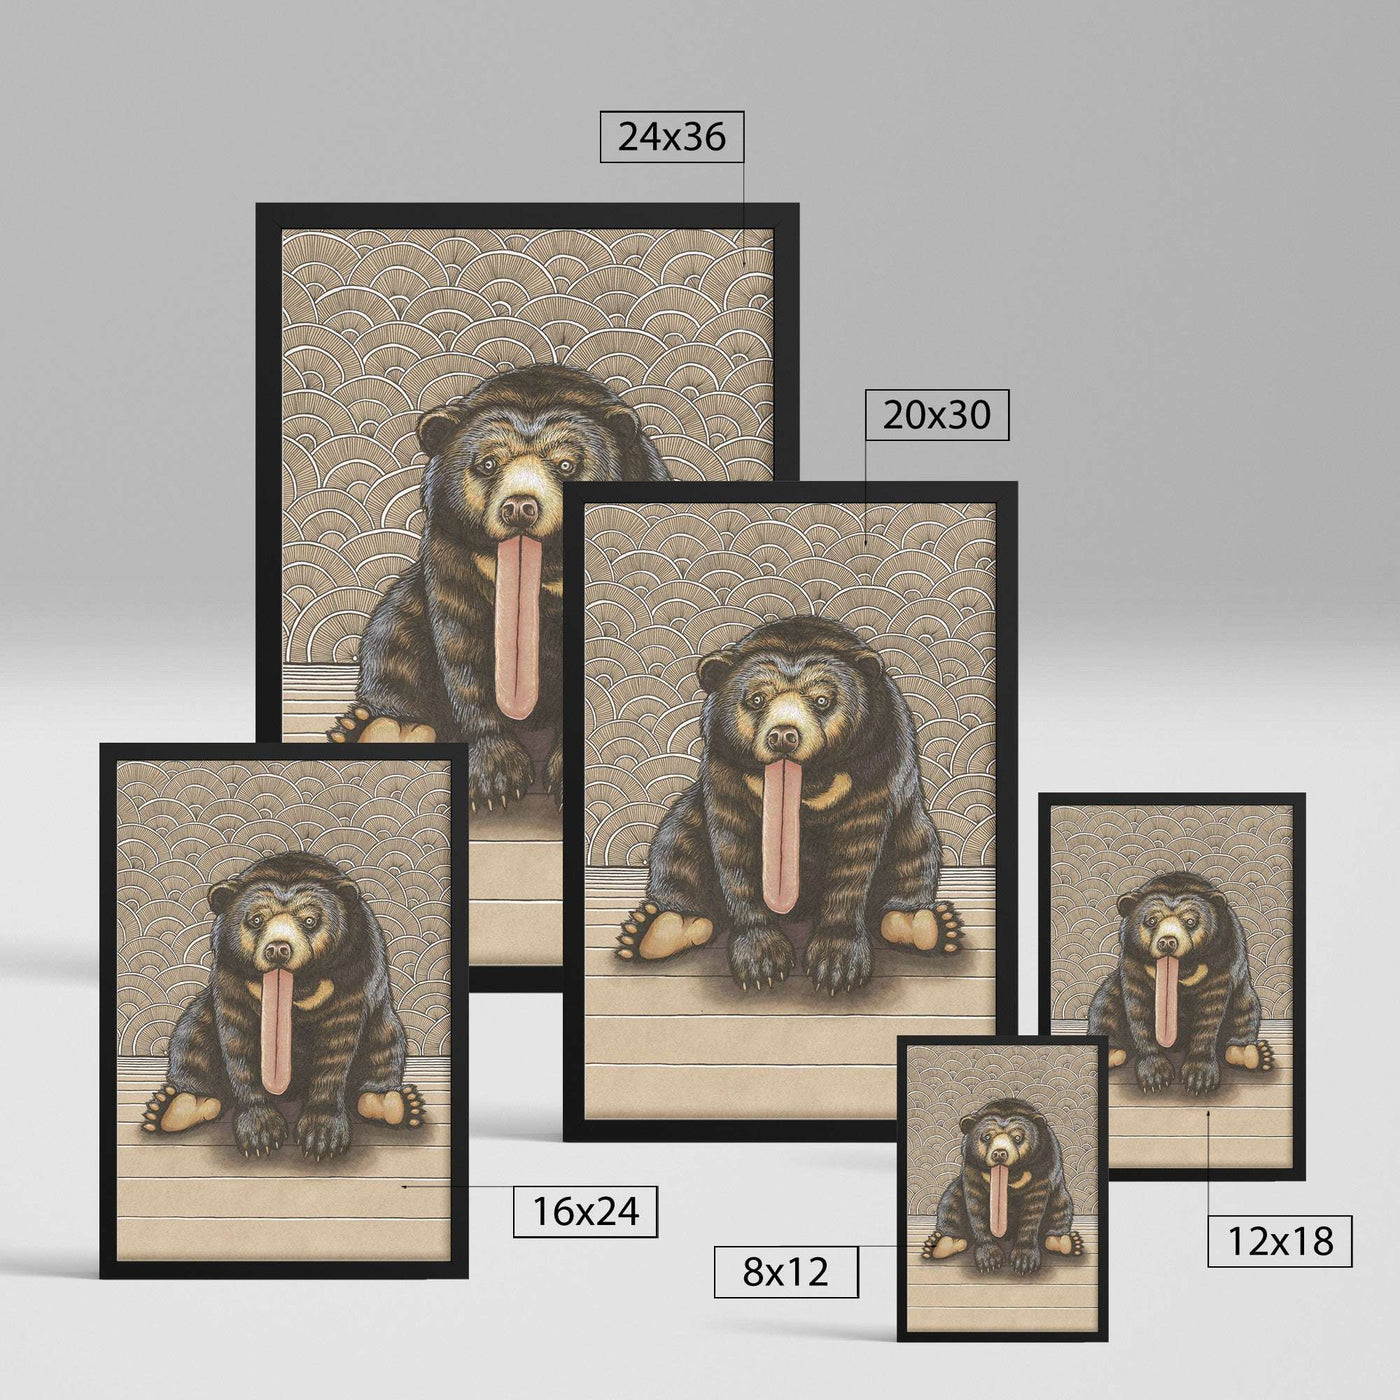 Size comparison of various Framed Sun Bear Art Prints from small to large displayed against a neutral background.